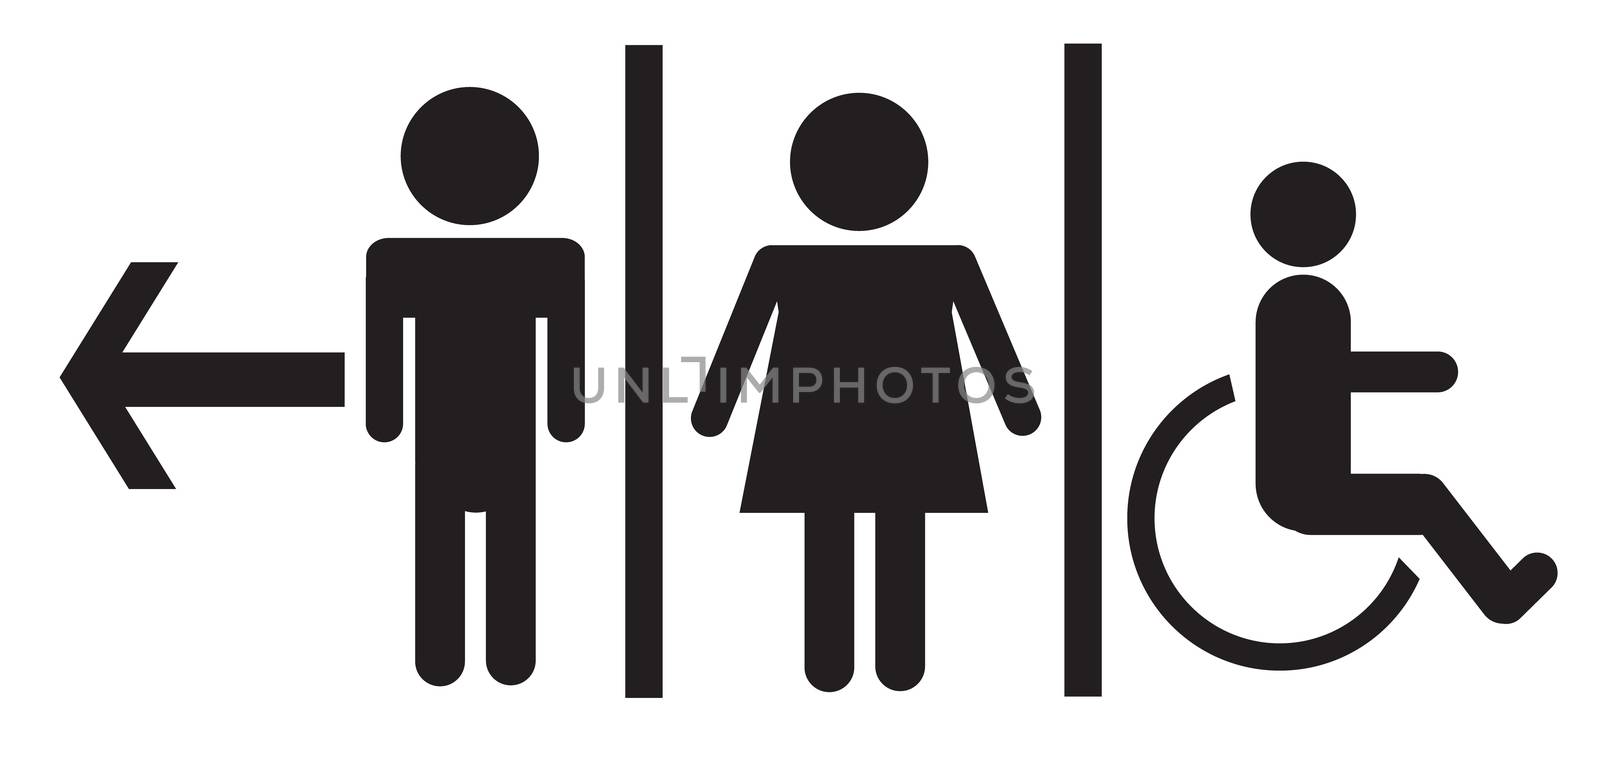 a man and a lady toilet sign,  toilet sign on white background